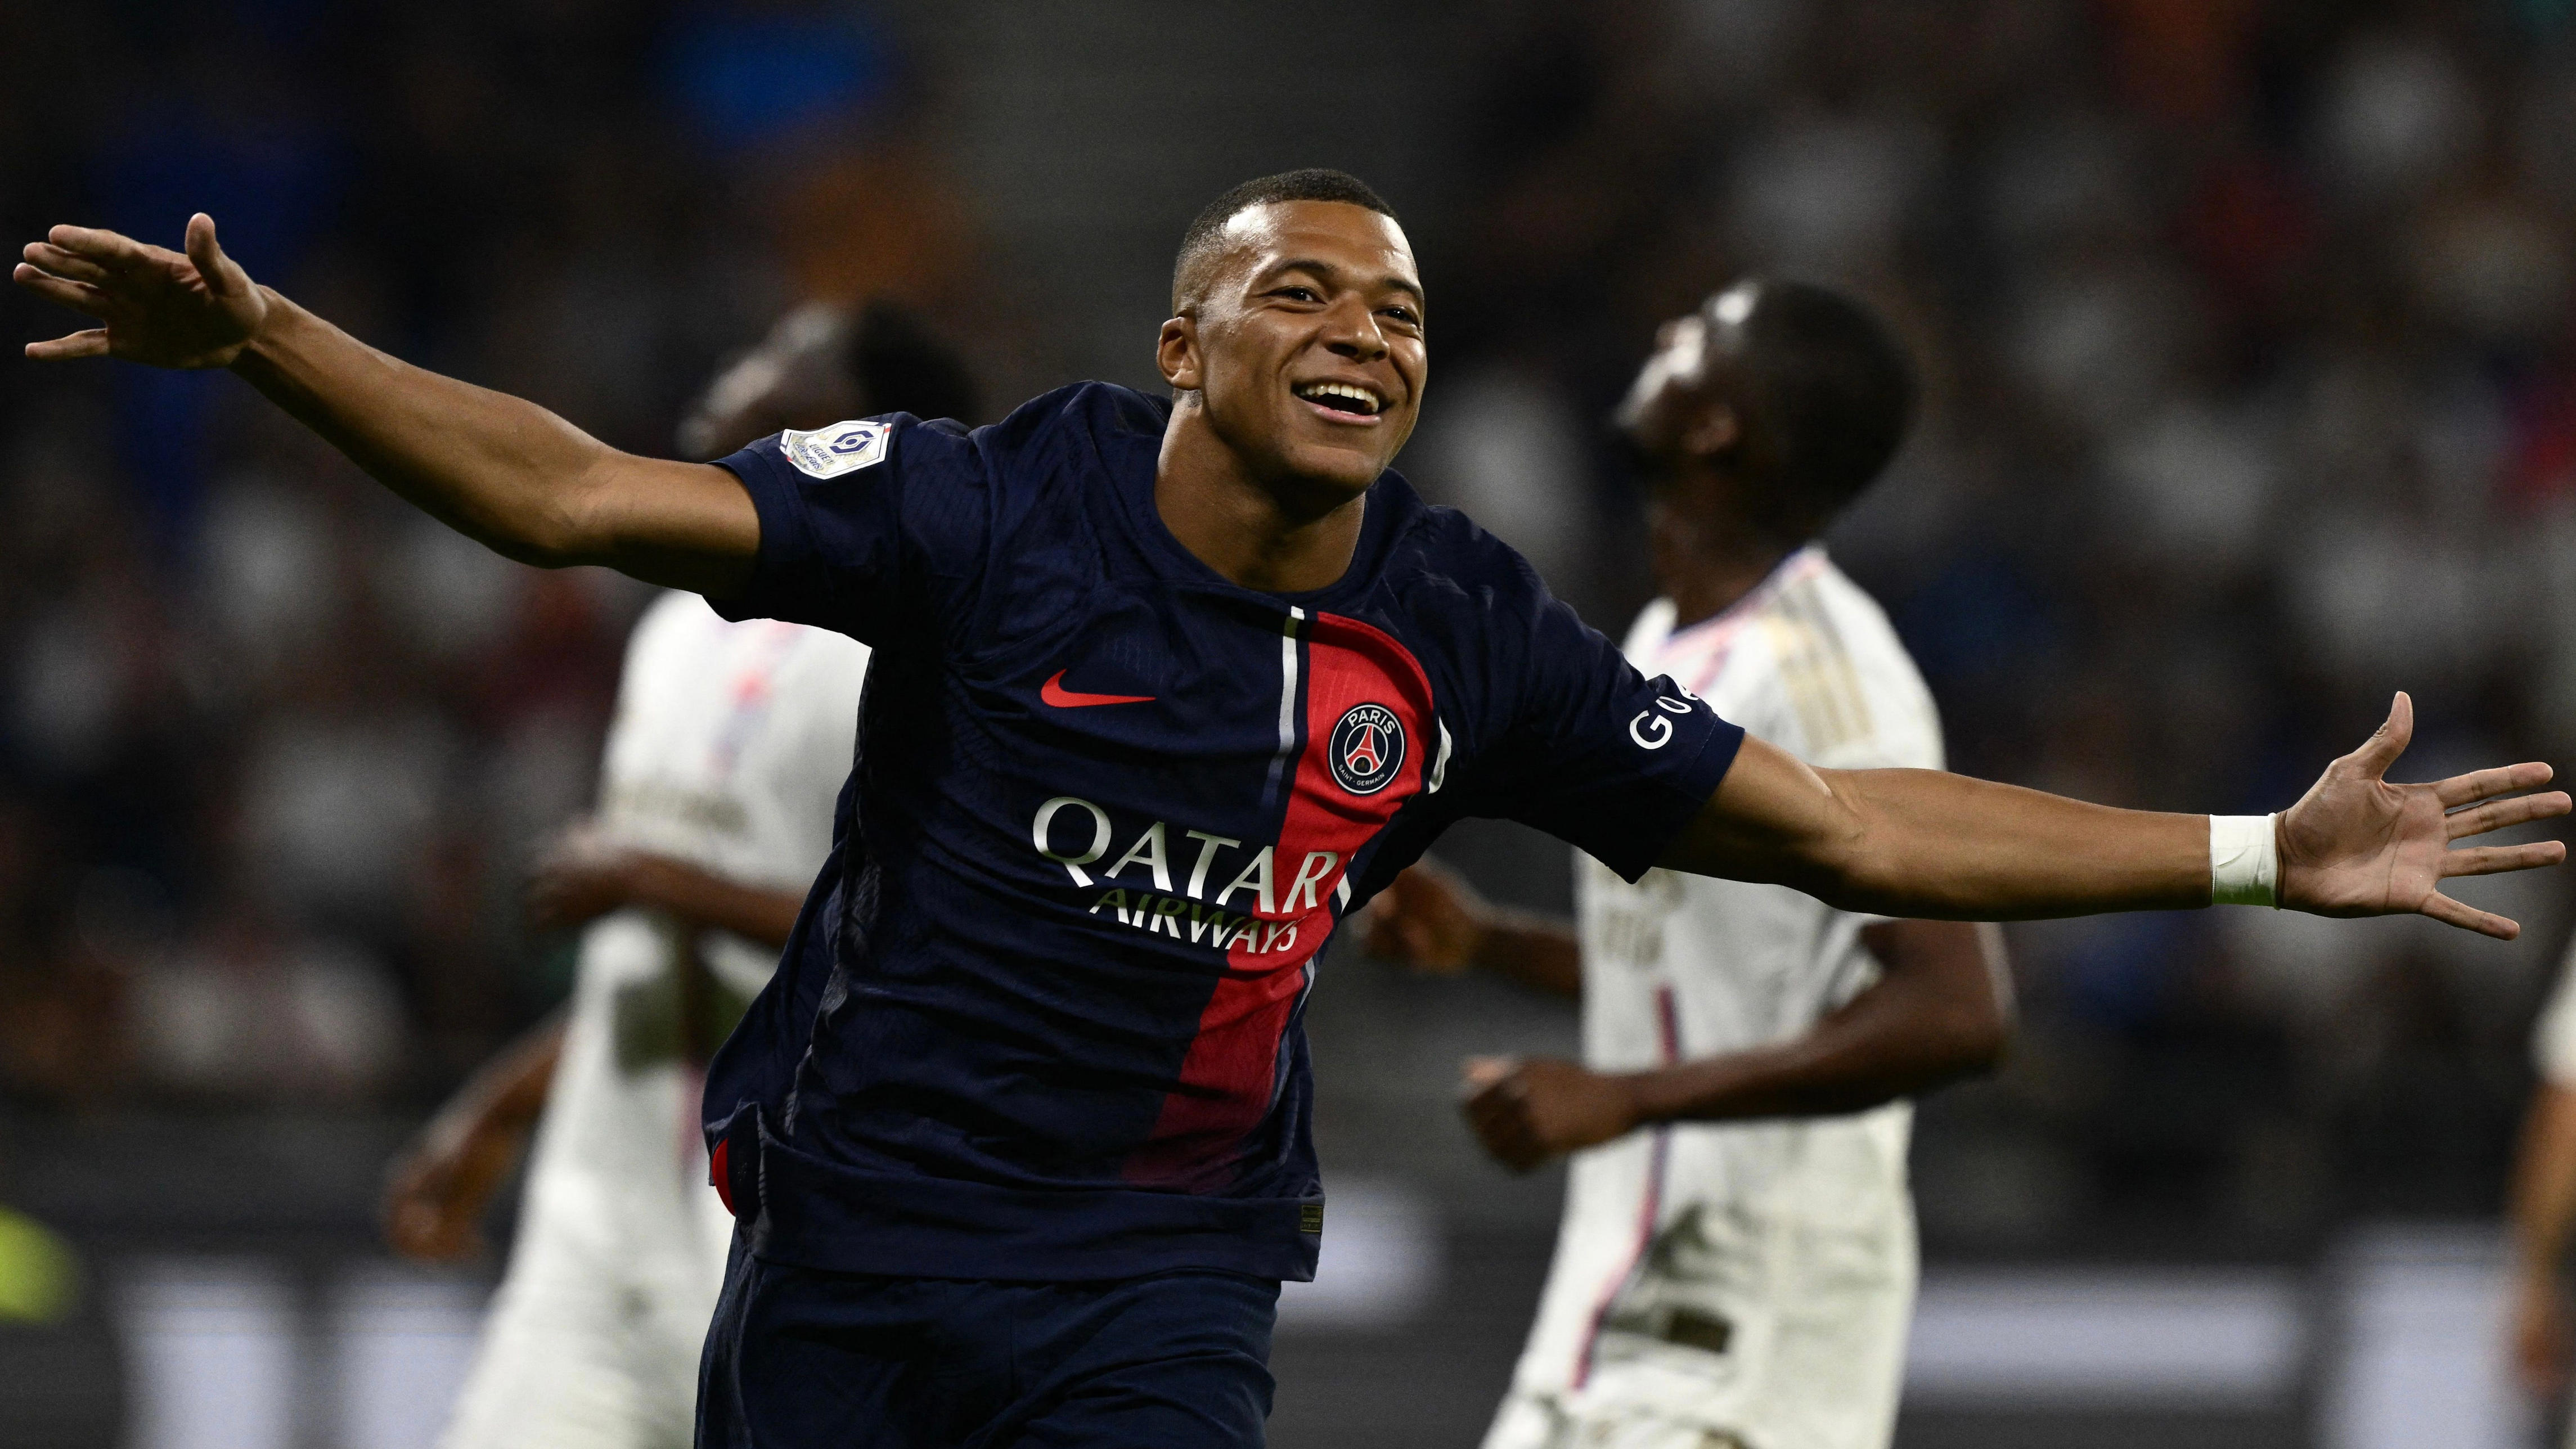 'I'm going to miss you a lot' - PSG superstar Kylian Mbappe bids